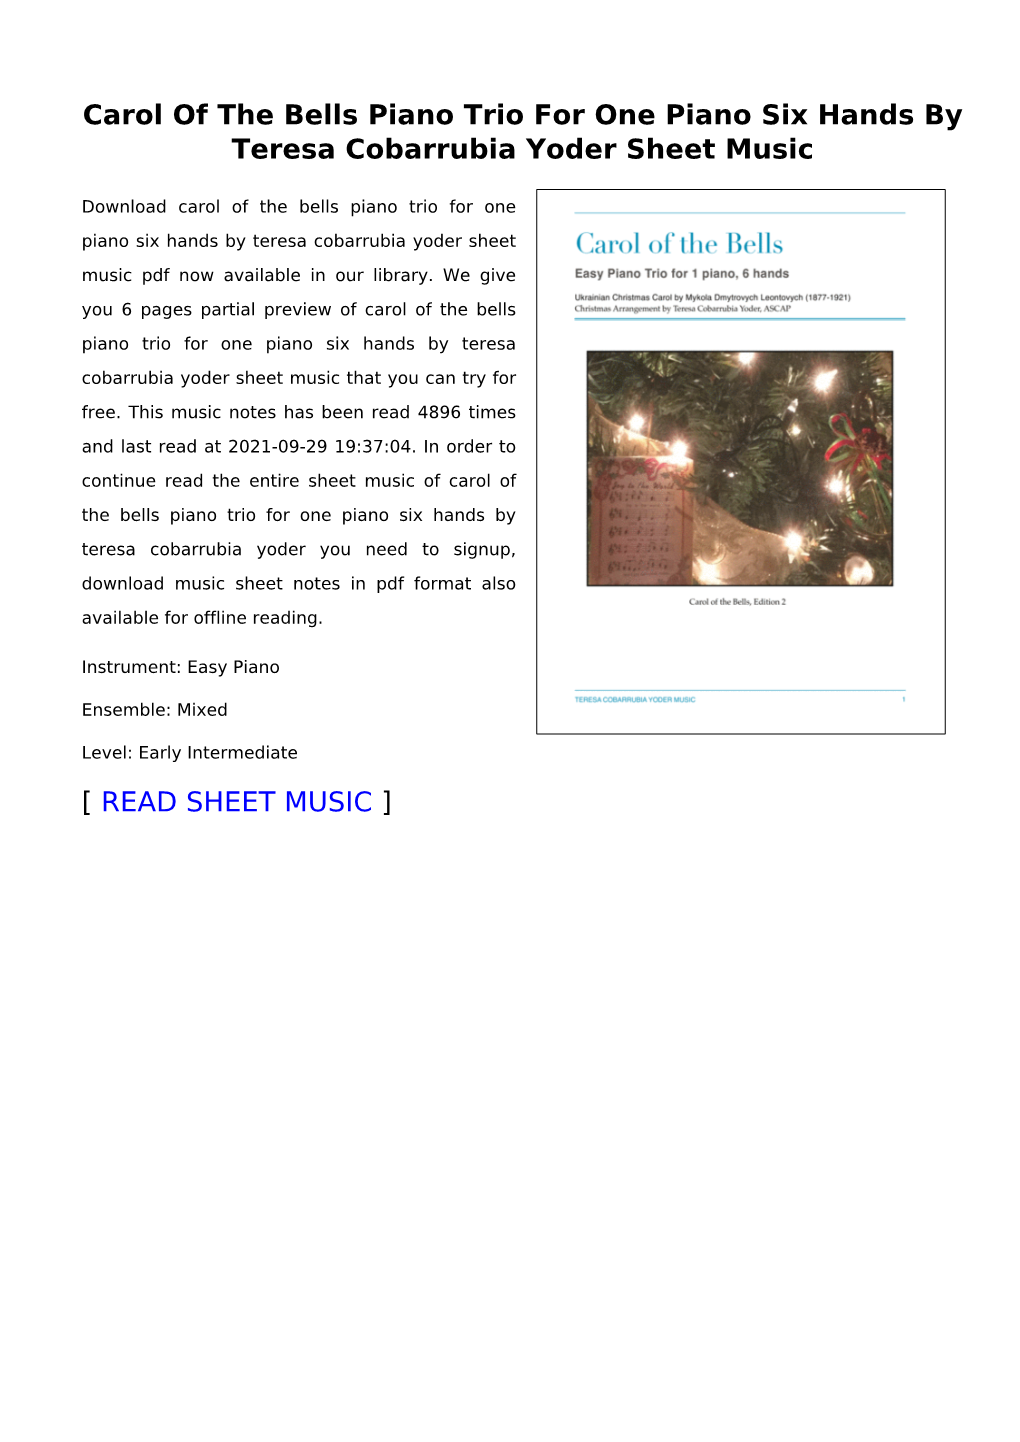 Carol of the Bells Piano Trio for One Piano Six Hands by Teresa Cobarrubia Yoder Sheet Music